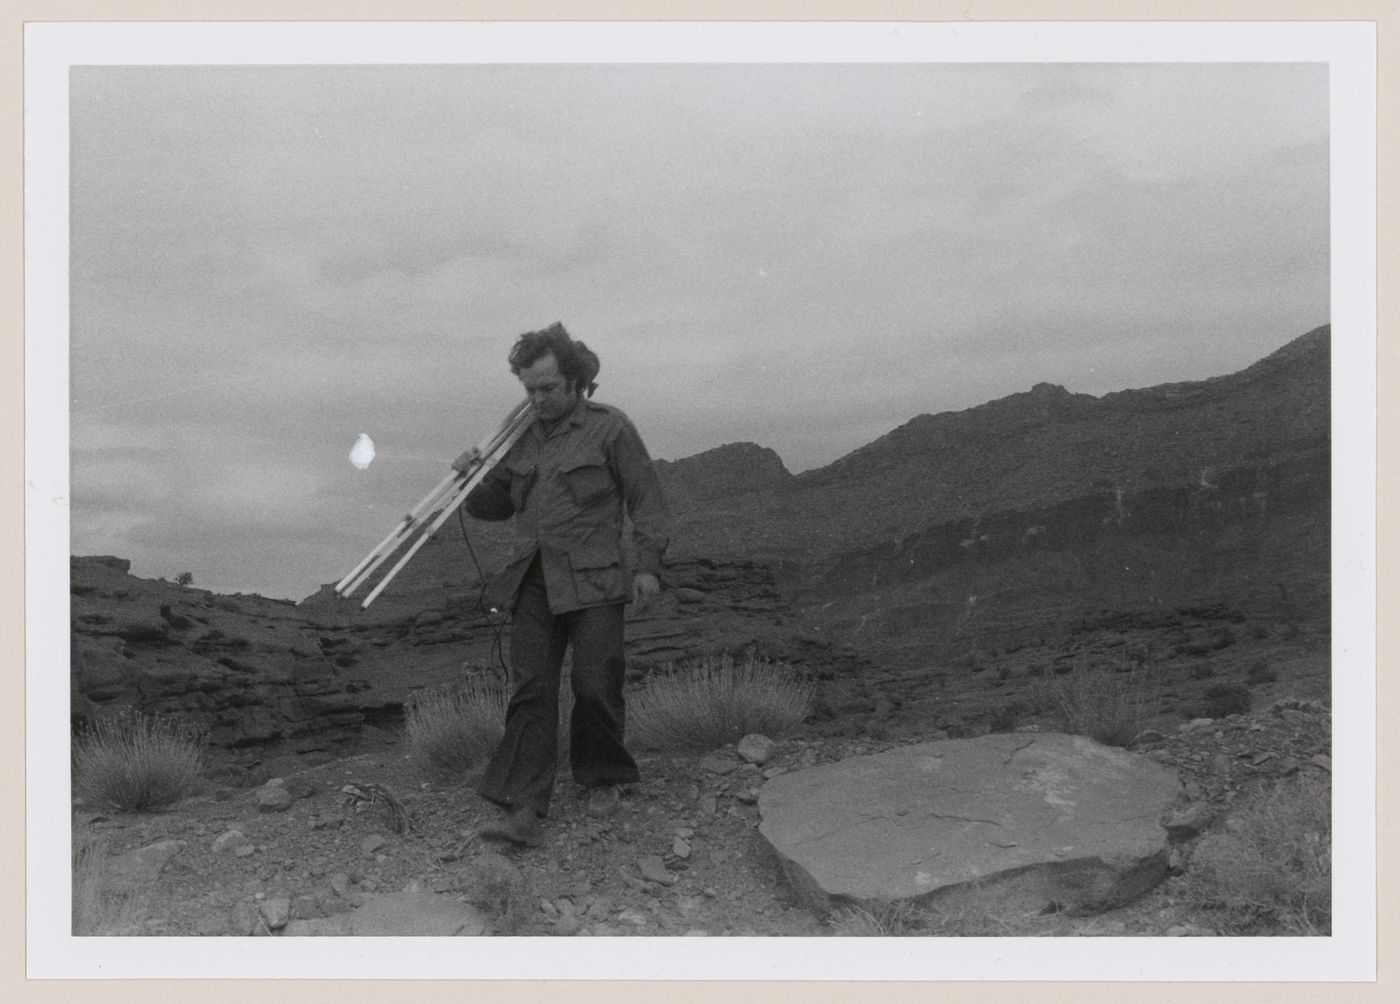 Photograph of Gianni Pettena in front of rock formations for About None Conscious Architecture